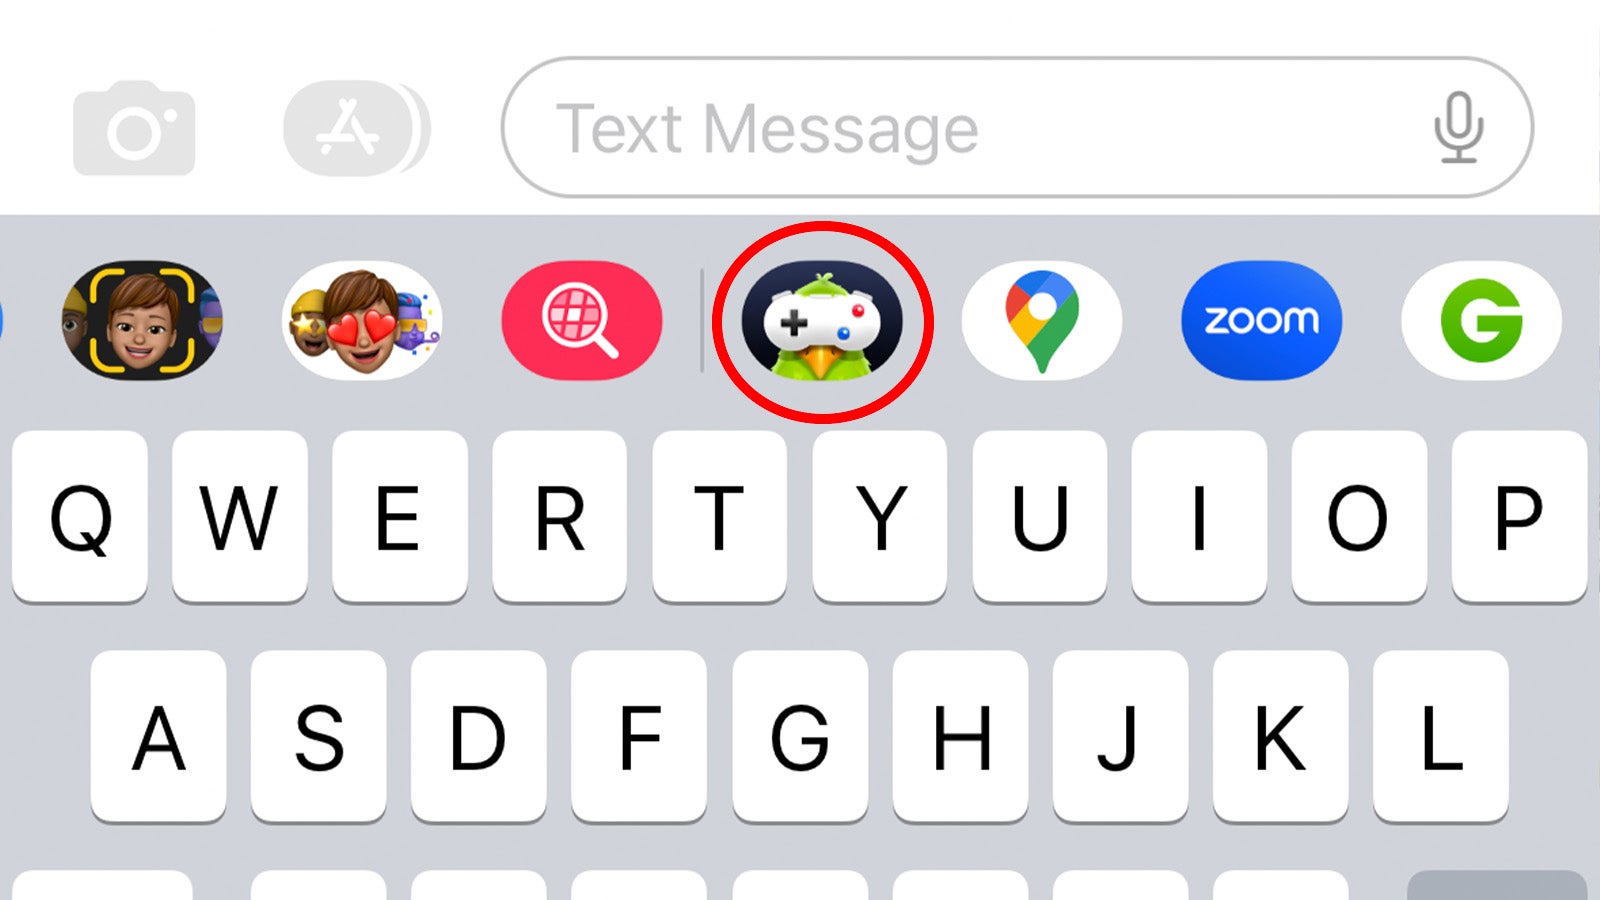 App icon tray in the Messages app